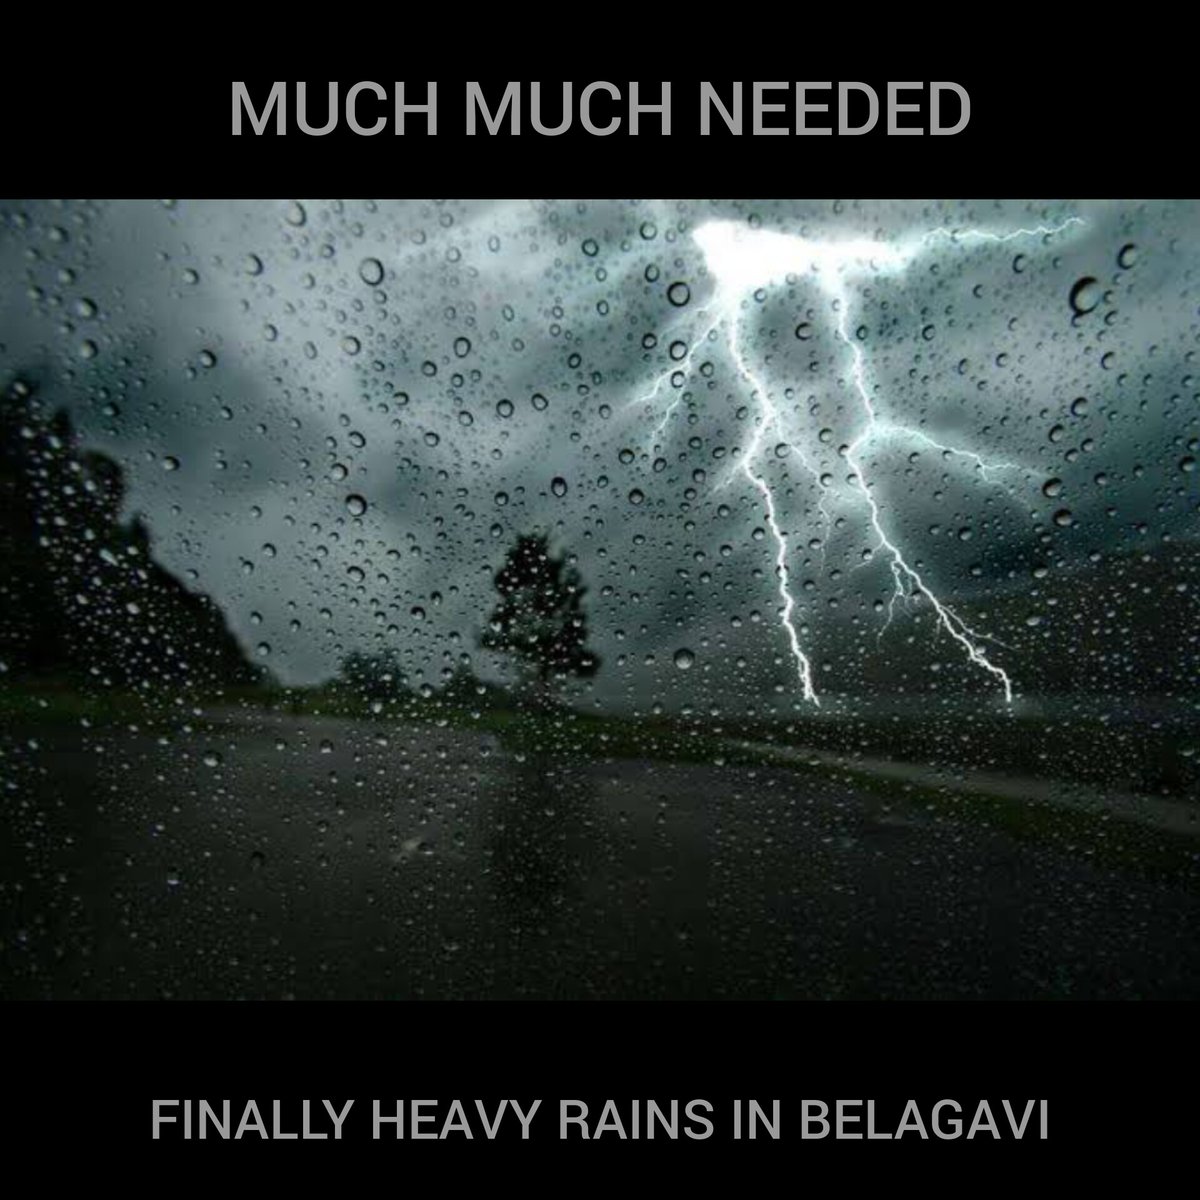 FINALLY heavy rains in #belagavi which were very much needed. Heavy downpour along with thunderstorms.